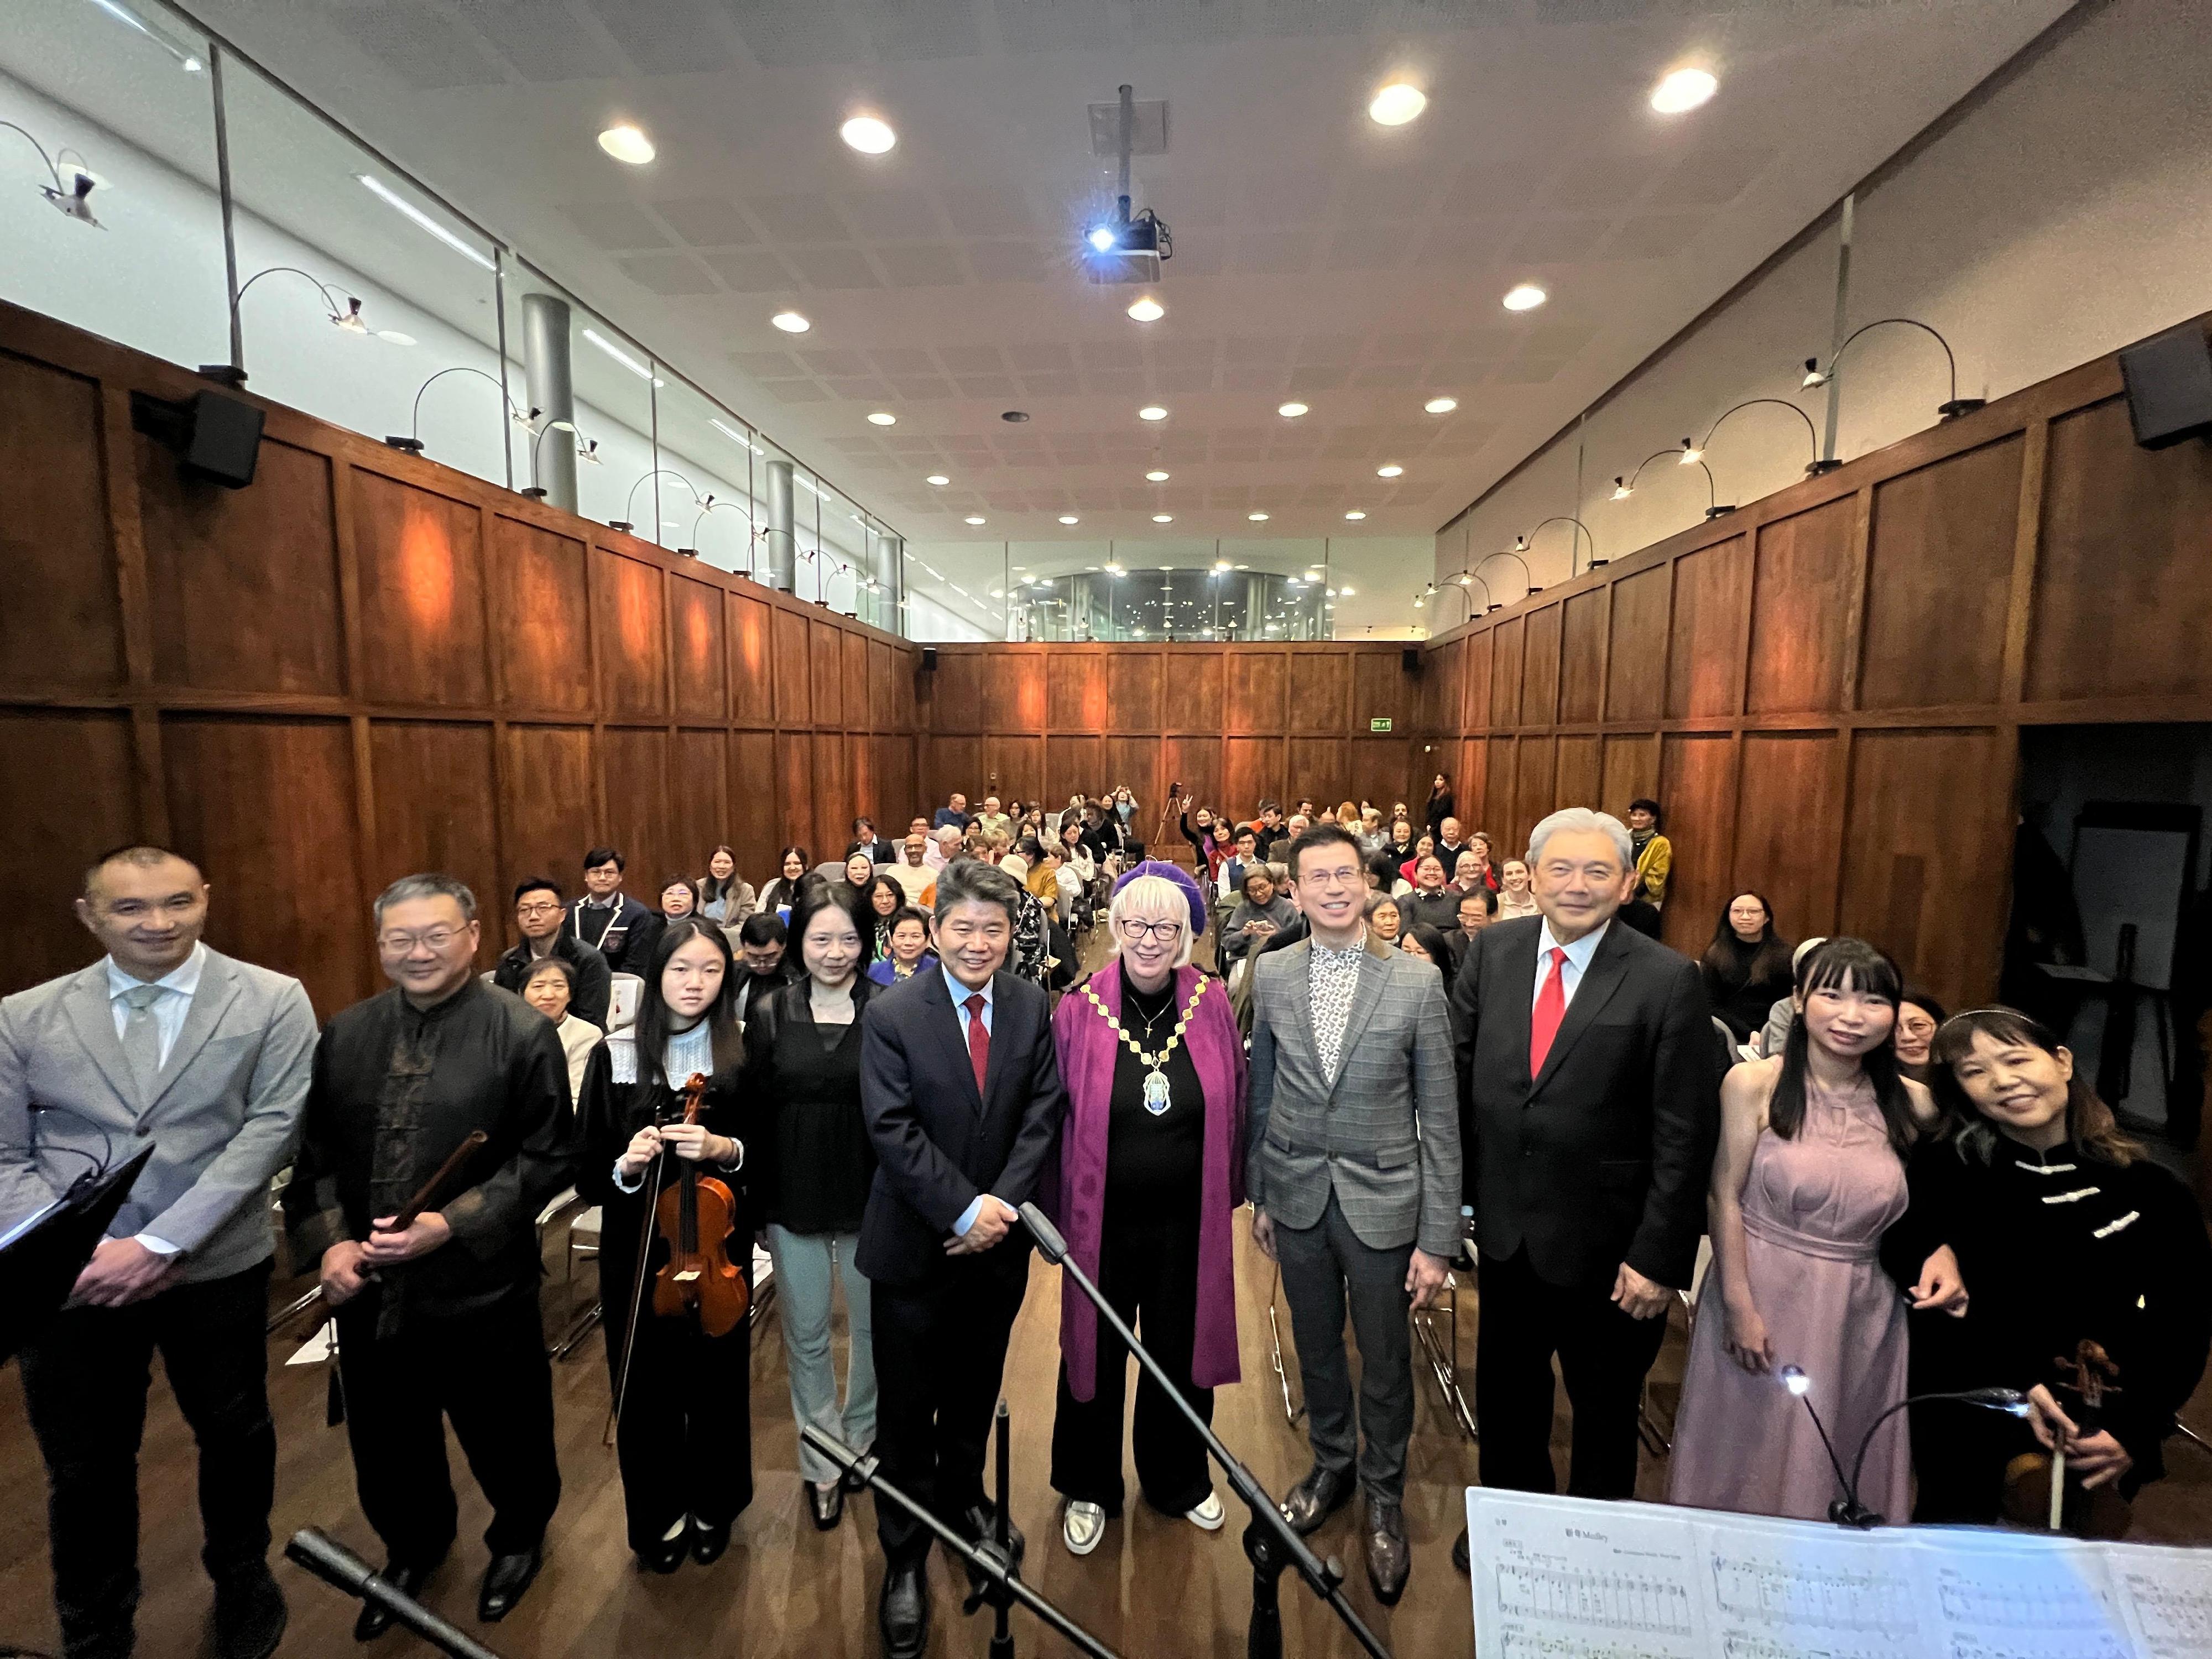 The Hong Kong Economic and Trade Office, London (London ETO) supported the Ming-Ai (London) Institute's Hong Kong pop music concert held at St Martin-in-the-Fields Hall, Trafalgar Square in London, the United Kingdom, on March 7 (London time). Photo shows (from row, from fourth left) the Dean of the Ming-Ai (London) Institute, Ms Li Chungwen; the Minister Counsellor for Cultural Affairs of the Chinese Embassy in the UK, Mr Li Liyan; the Lord Mayor of Westminster, Ms Patricia McAllister; the Director of the London ETO, Mr Gilford Law; the Chairman of the Board of Directors of the Ming-Ai (London) Institute, Professor Jonathan Liu, with the performers and audience members at the concert.